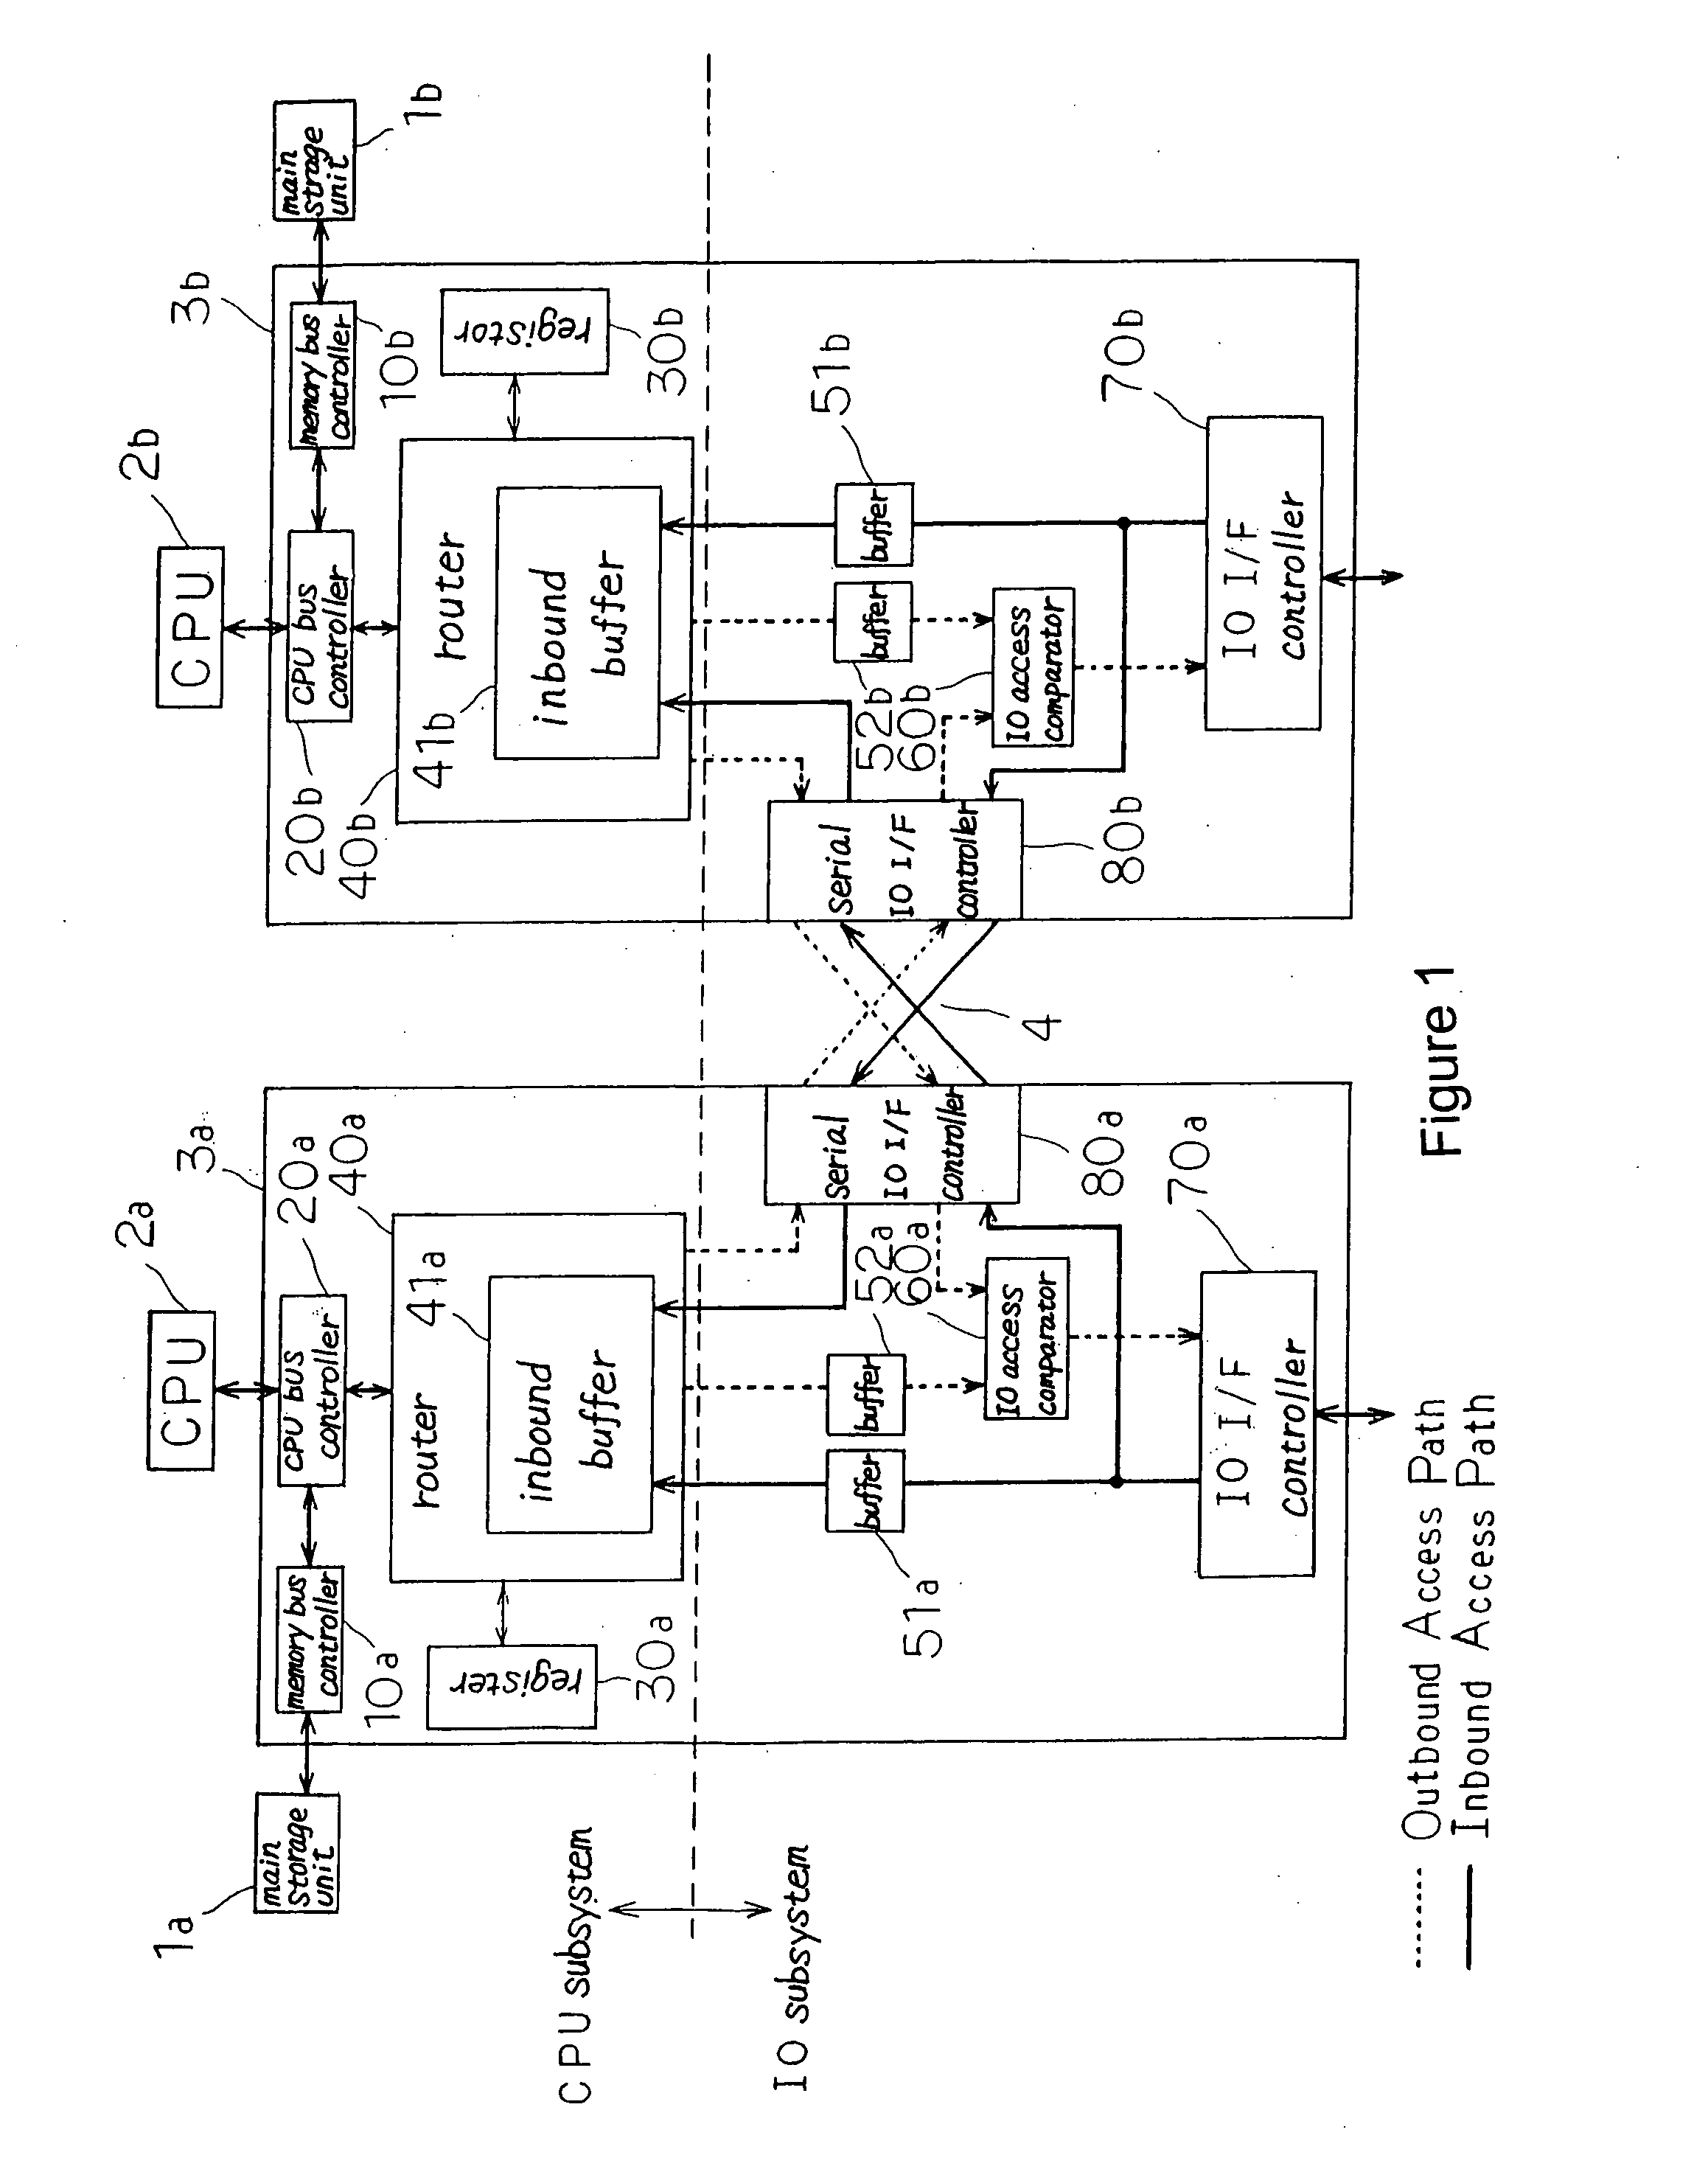 Fault-tolerant computer and method of controlling same